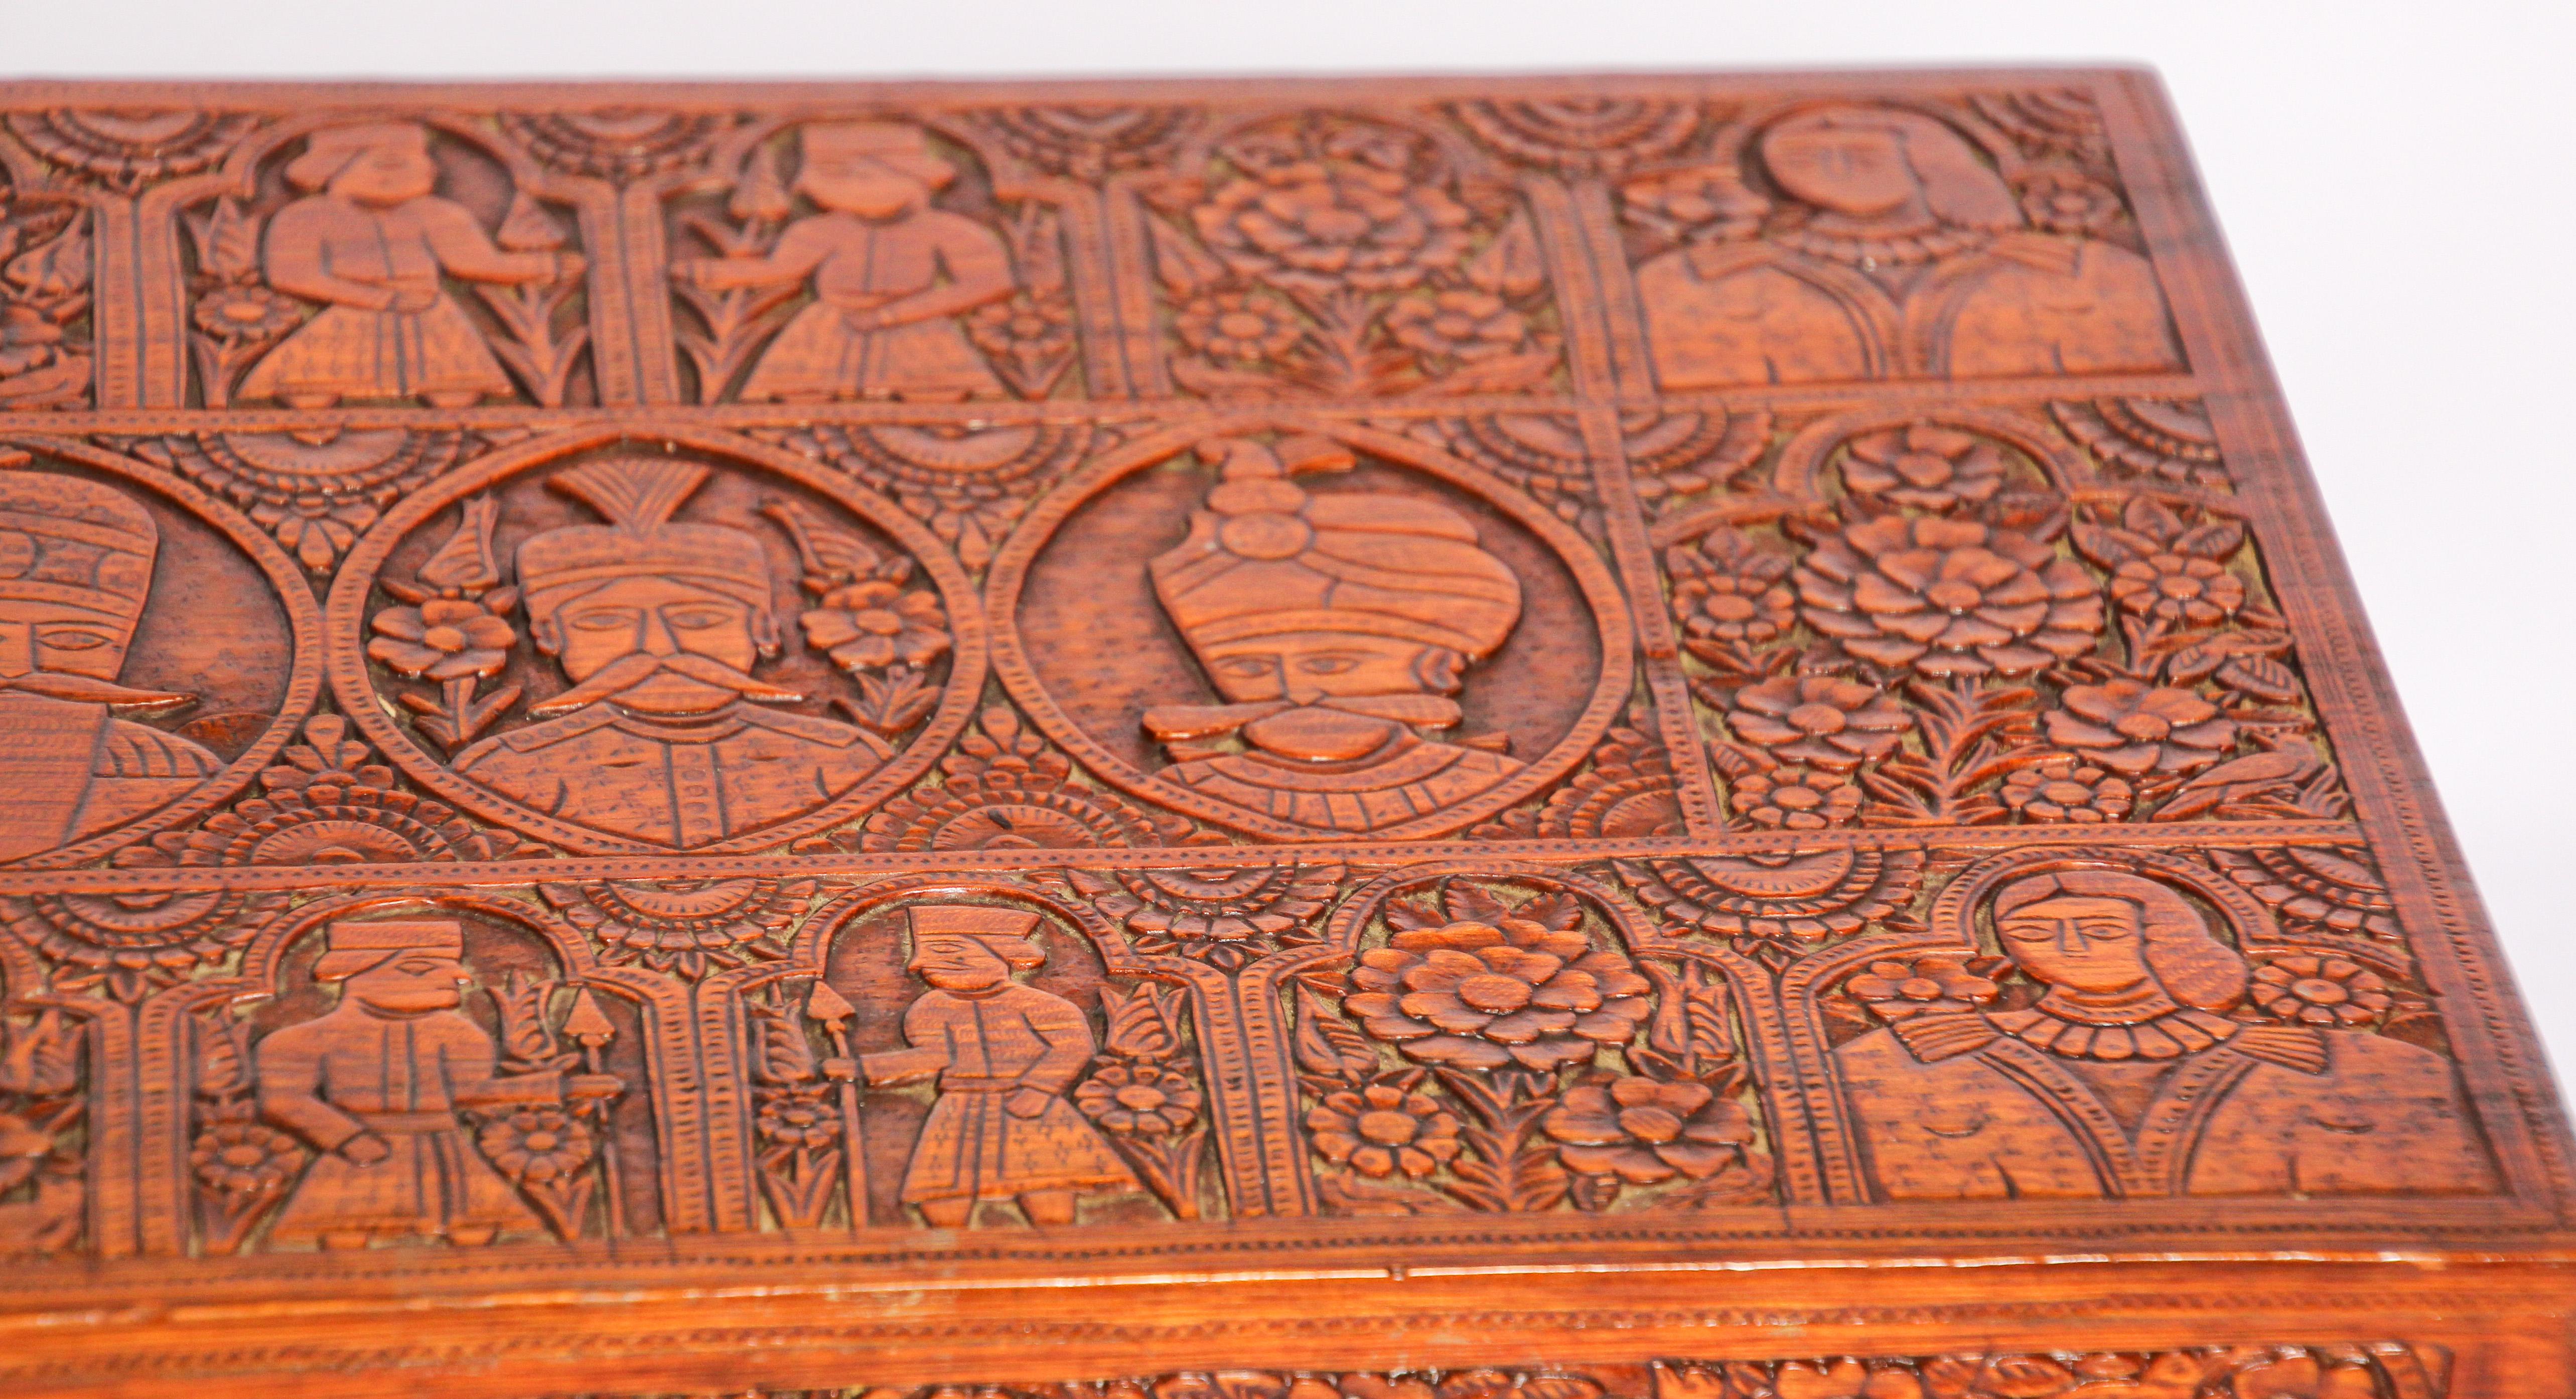 Hand-Crafted Large Early 19th Century Antique Hand Carved Wooden Mughal Decorative Box For Sale